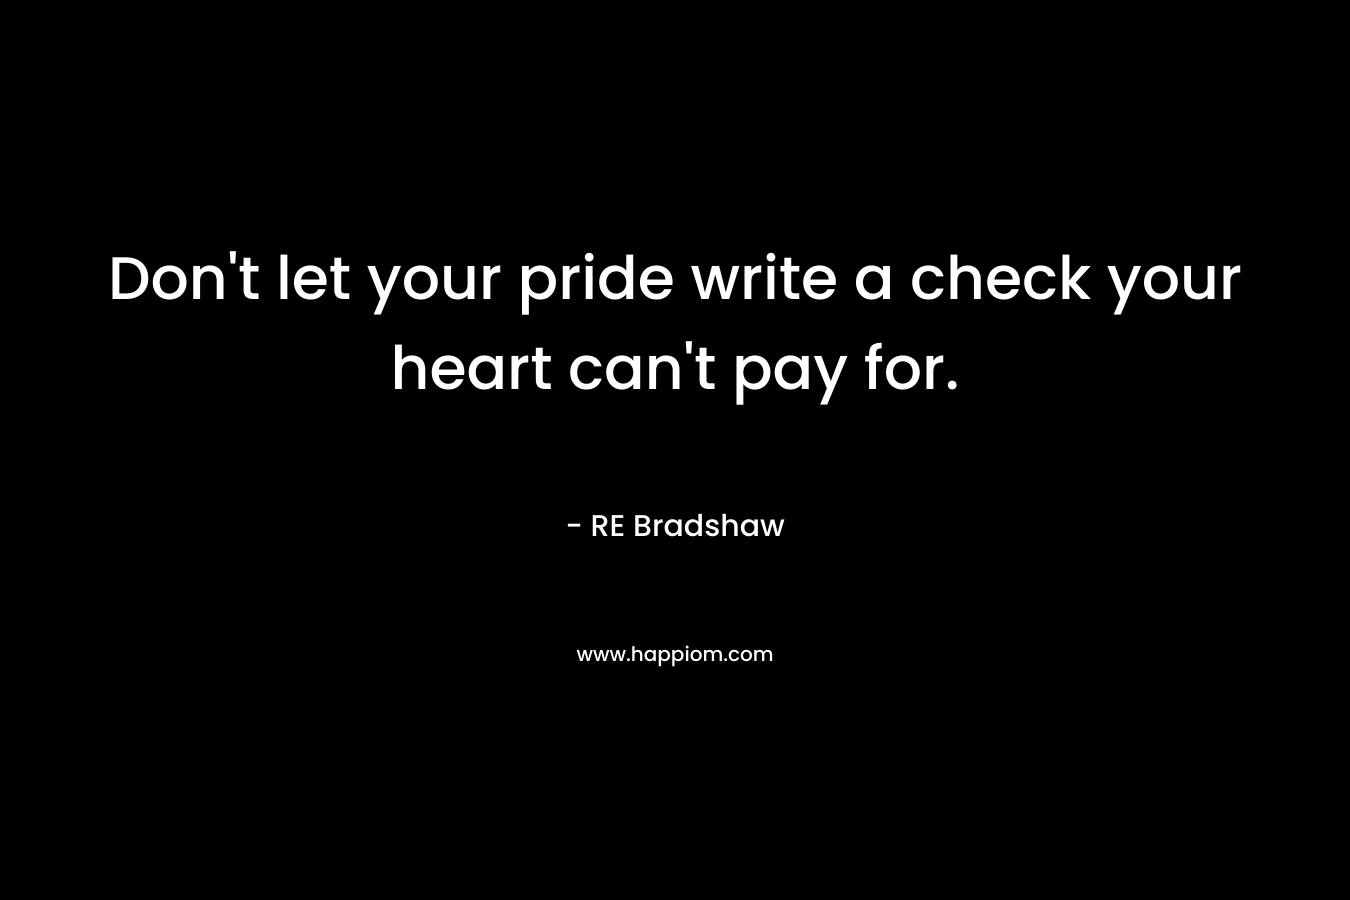 Don't let your pride write a check your heart can't pay for.